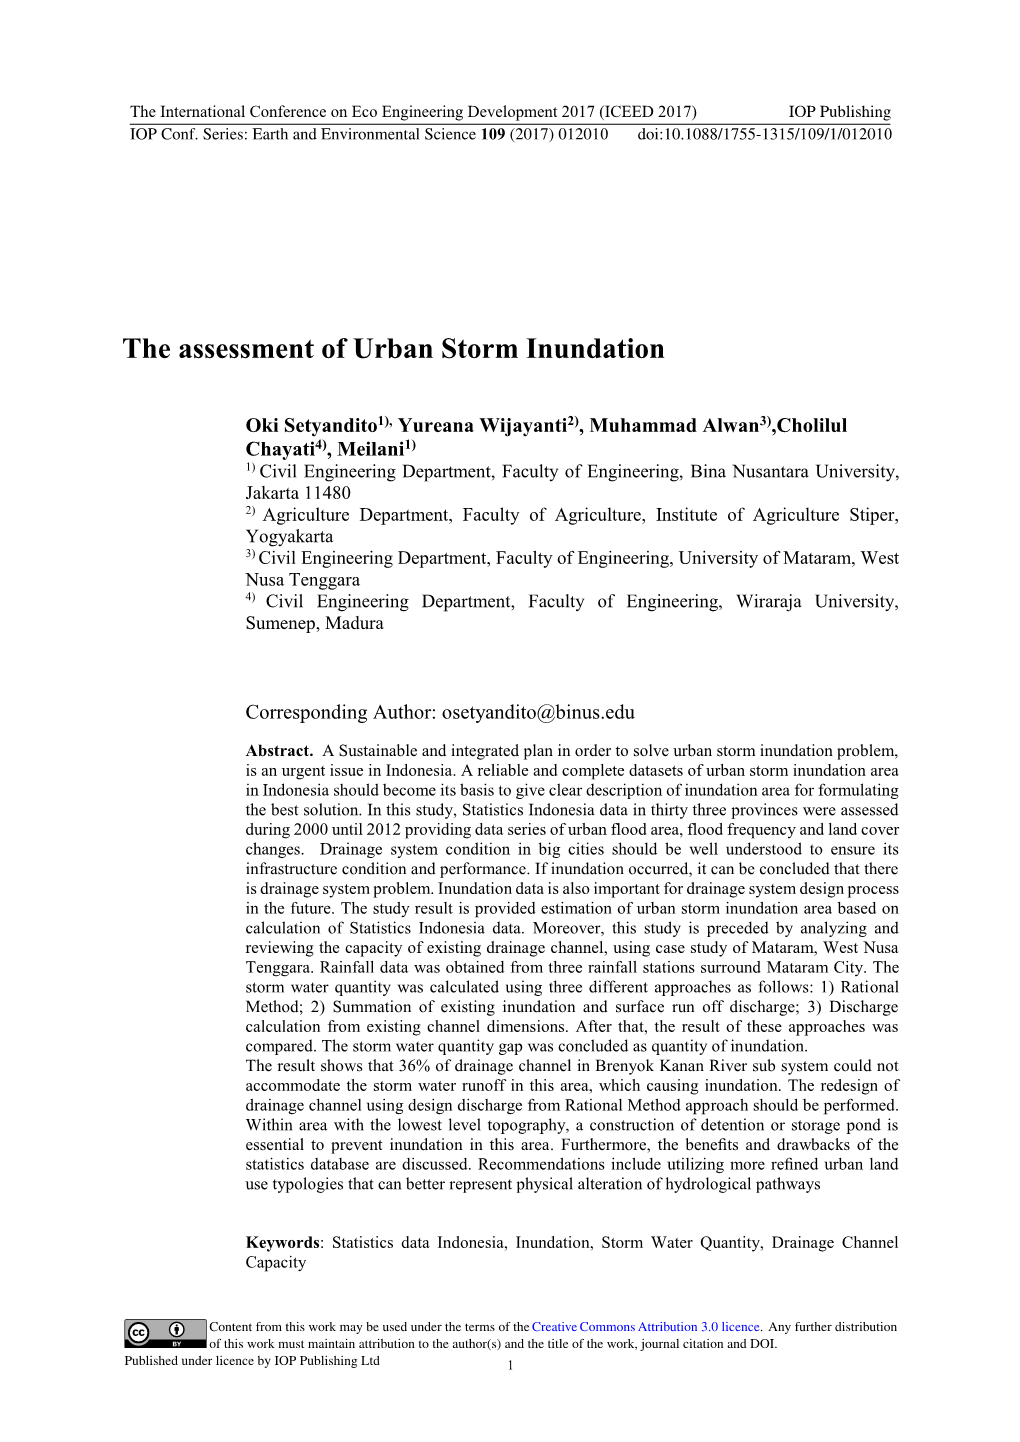 The Assessment of Urban Storm Inundation